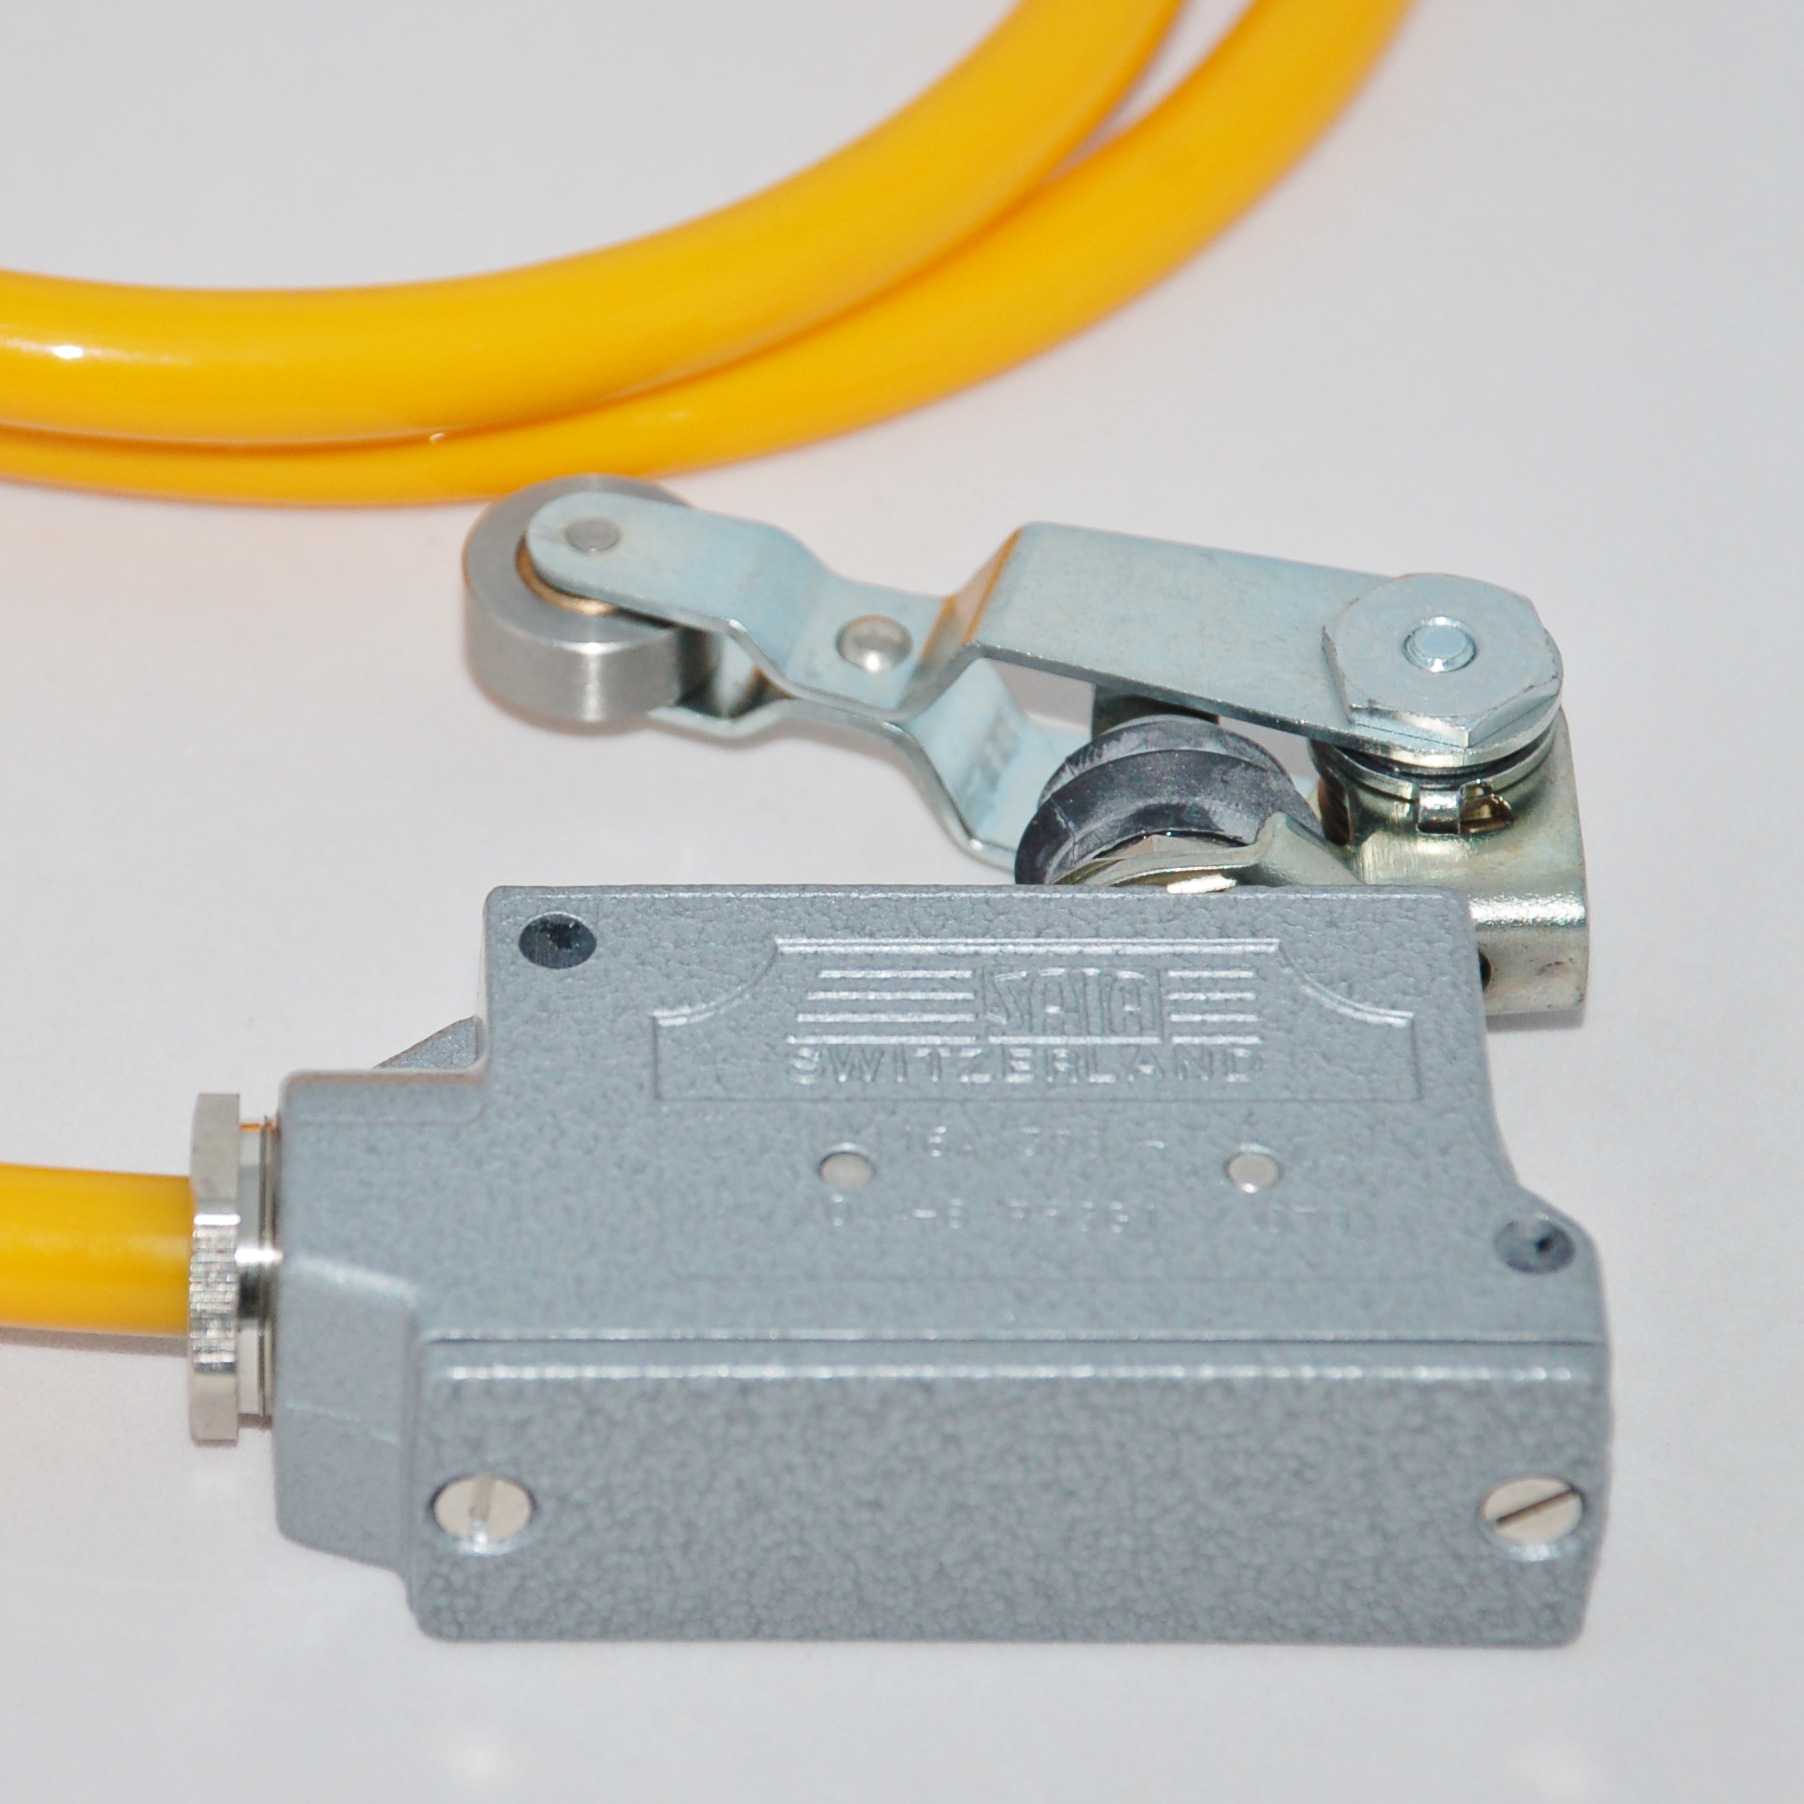 Saia 20a limit switch with roller lever